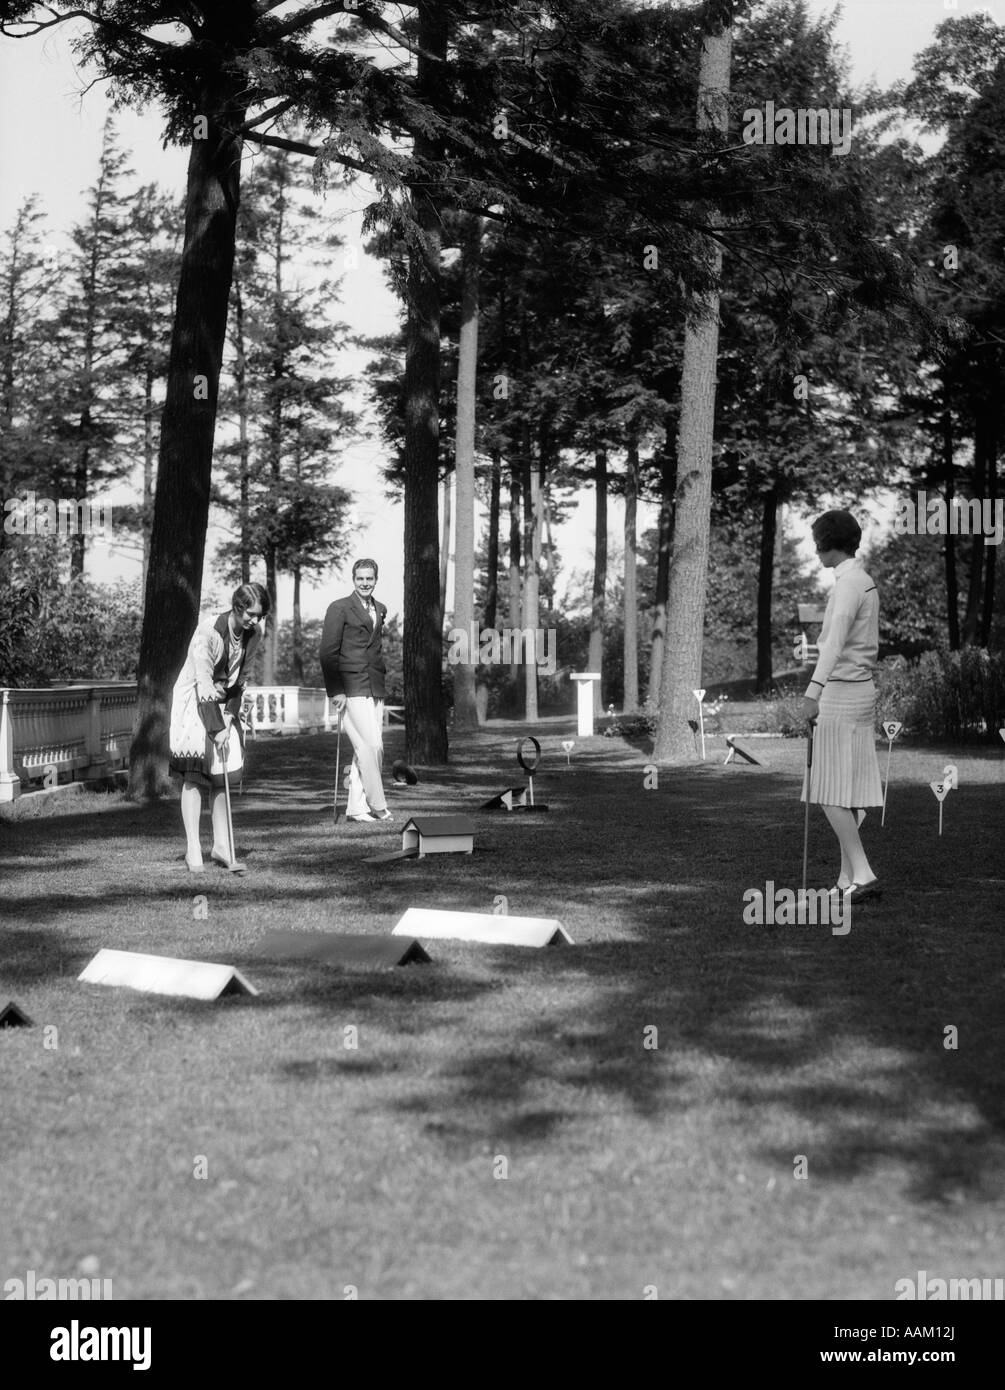 1920s 1930s MAN TWO WOMEN PLAYING MINIATURE OBSTACLE GOLF COURSE Stock Photo